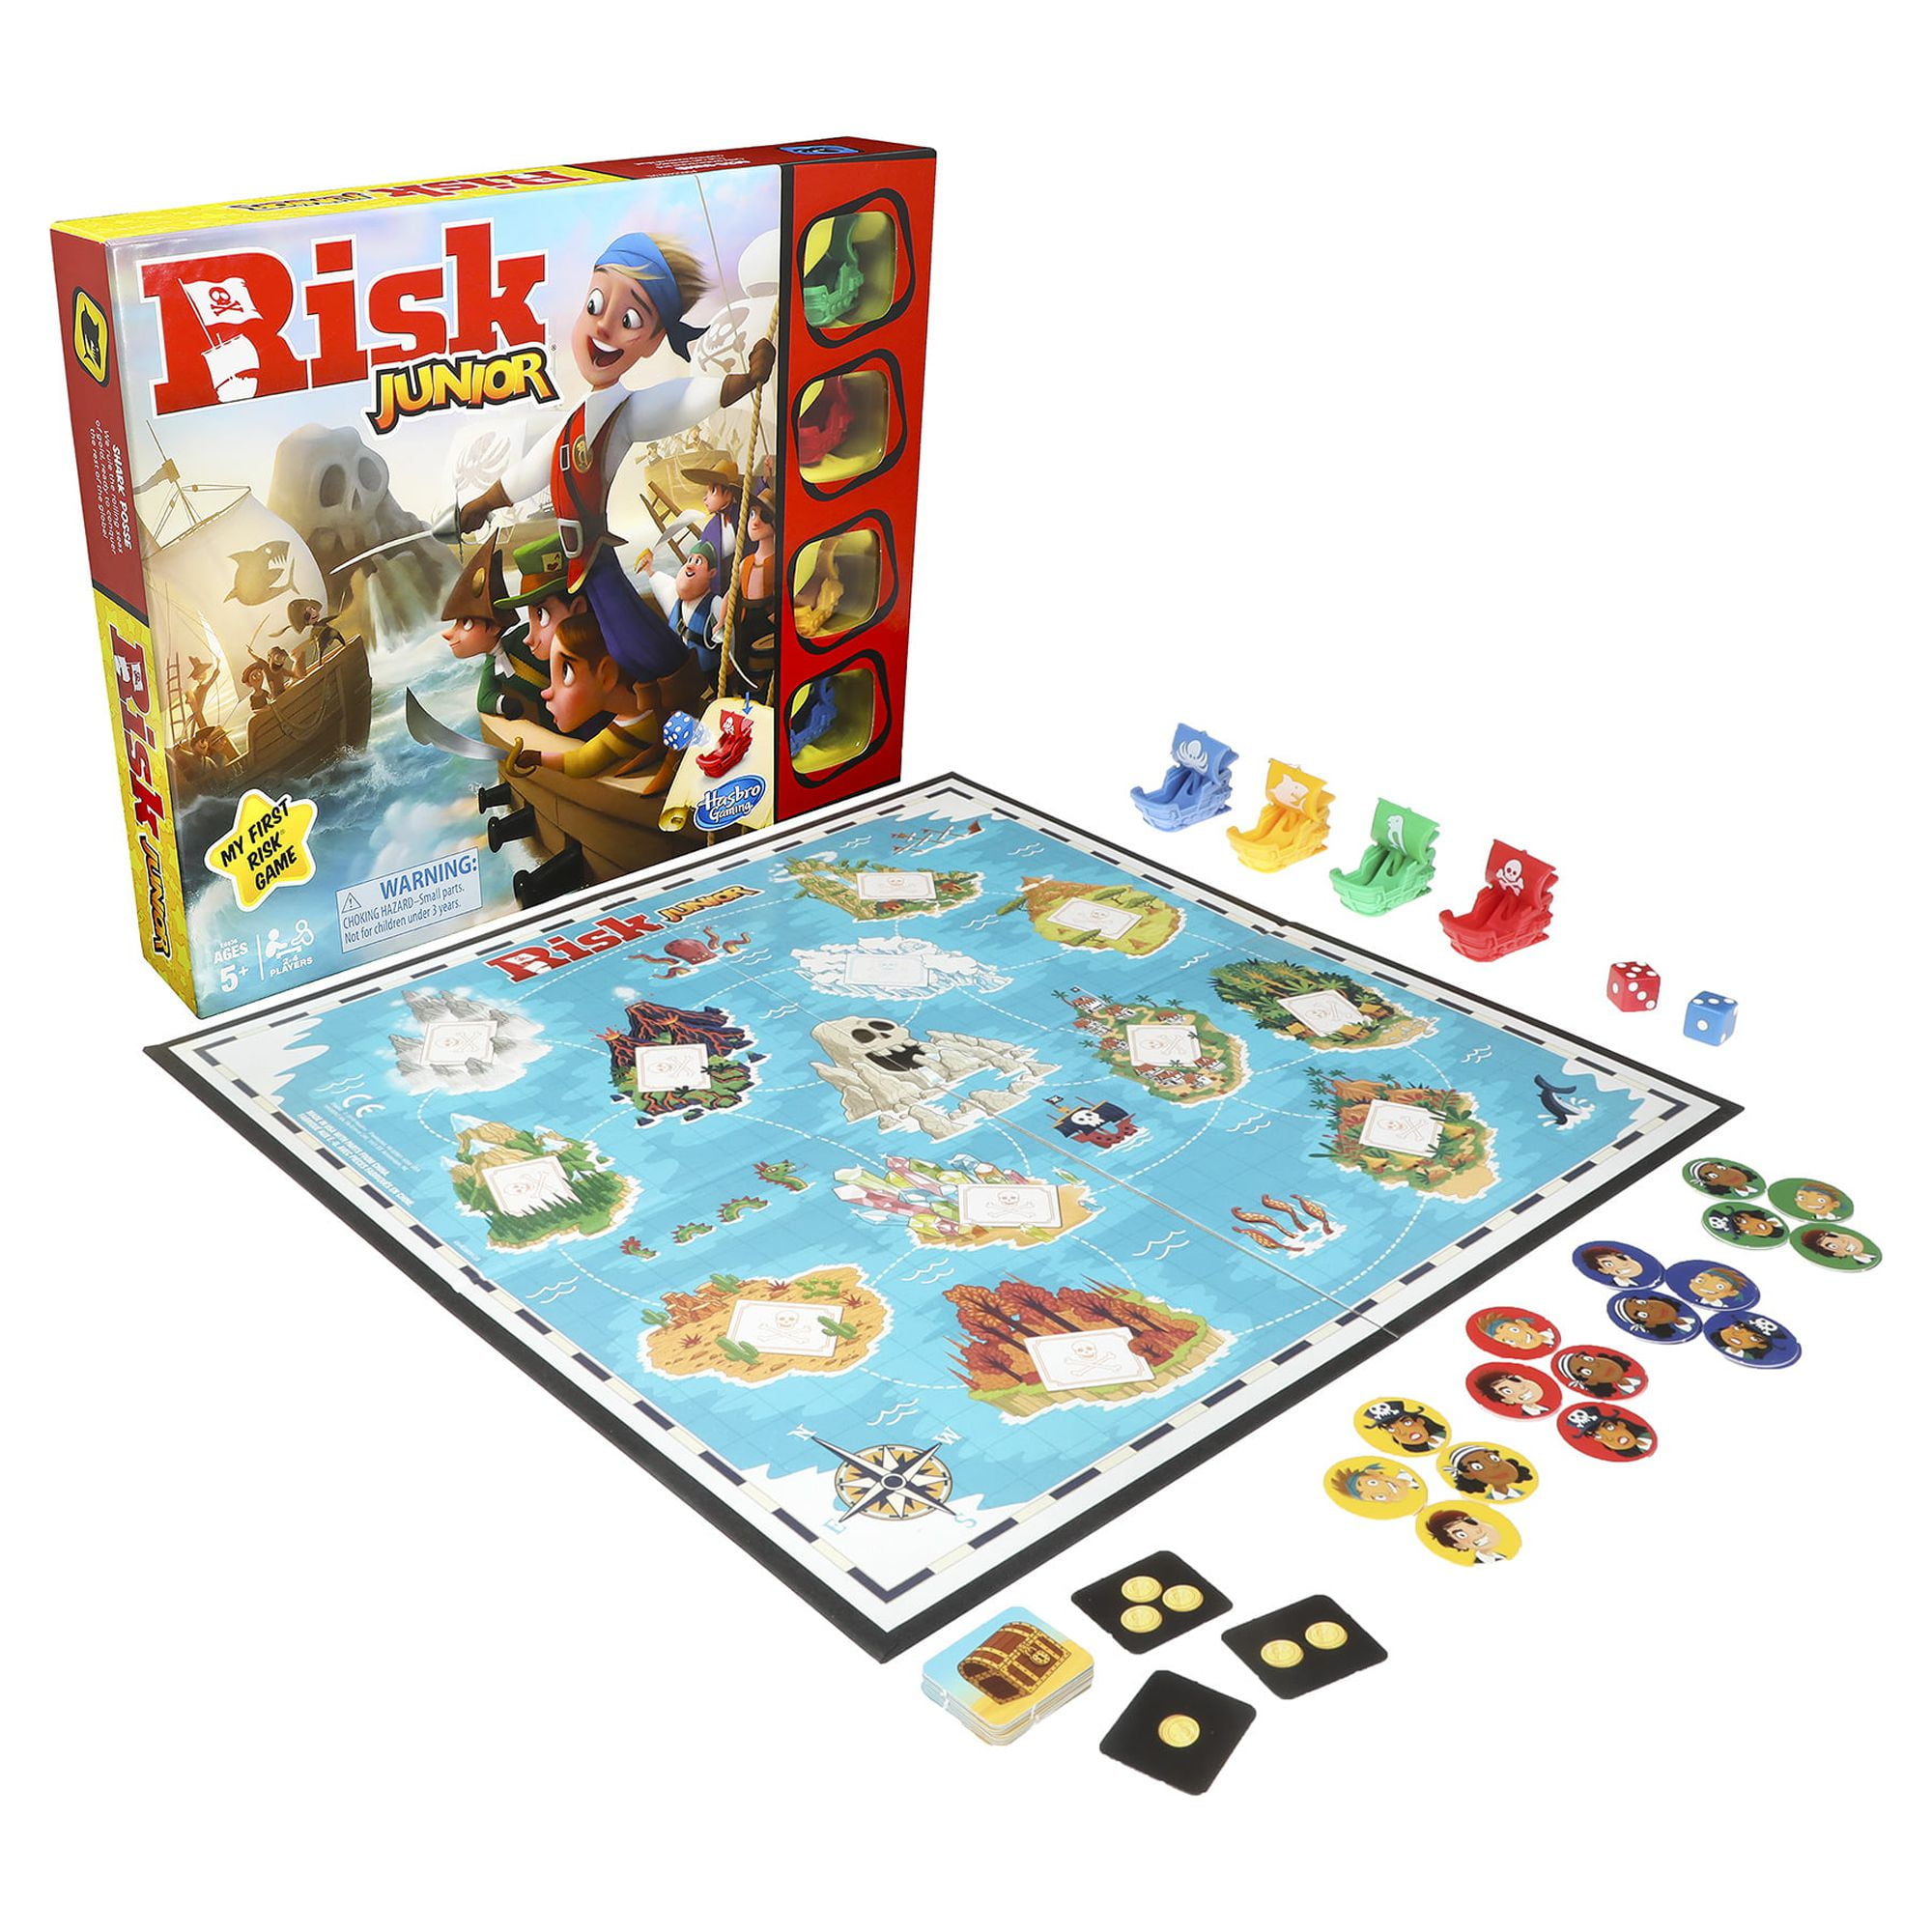 Play Risk Online • Play Risk Board Game Free Online Today! Another